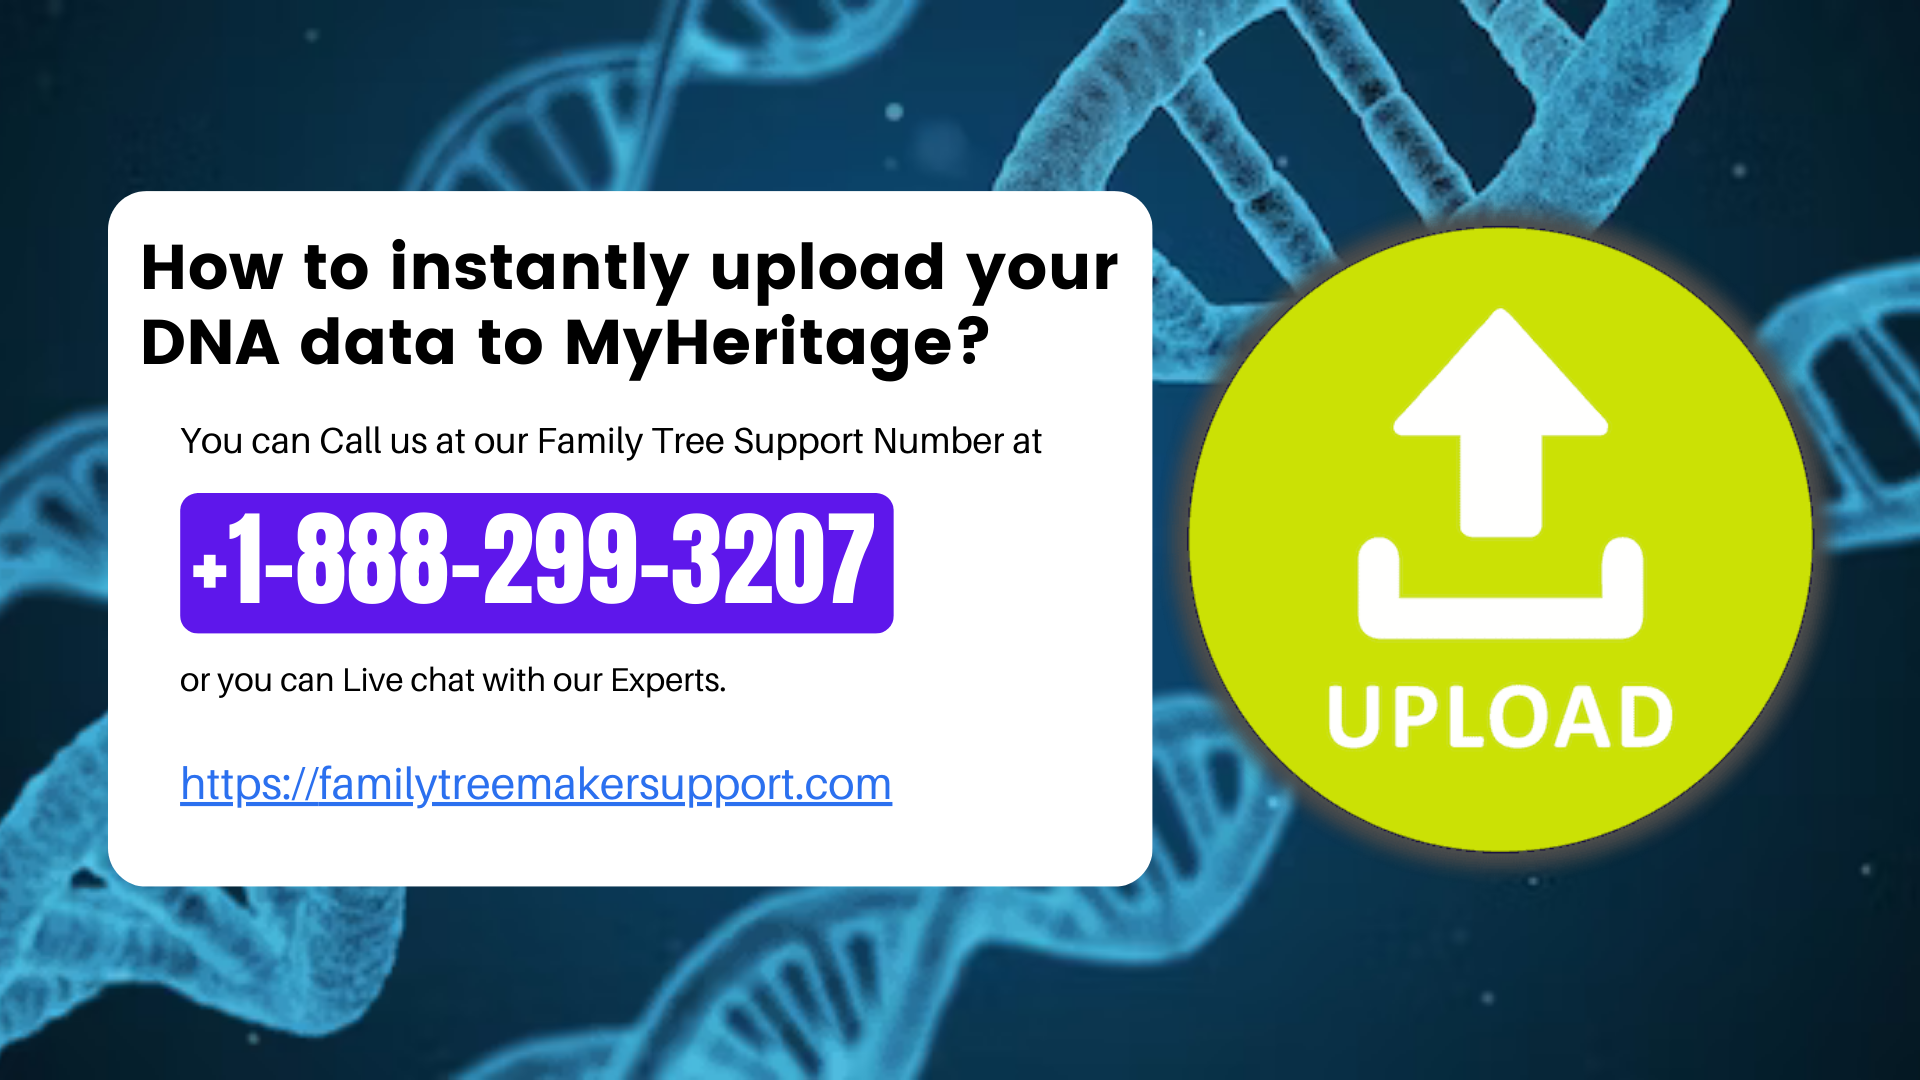 How to instantly upload your DNA data to MyHeritage?